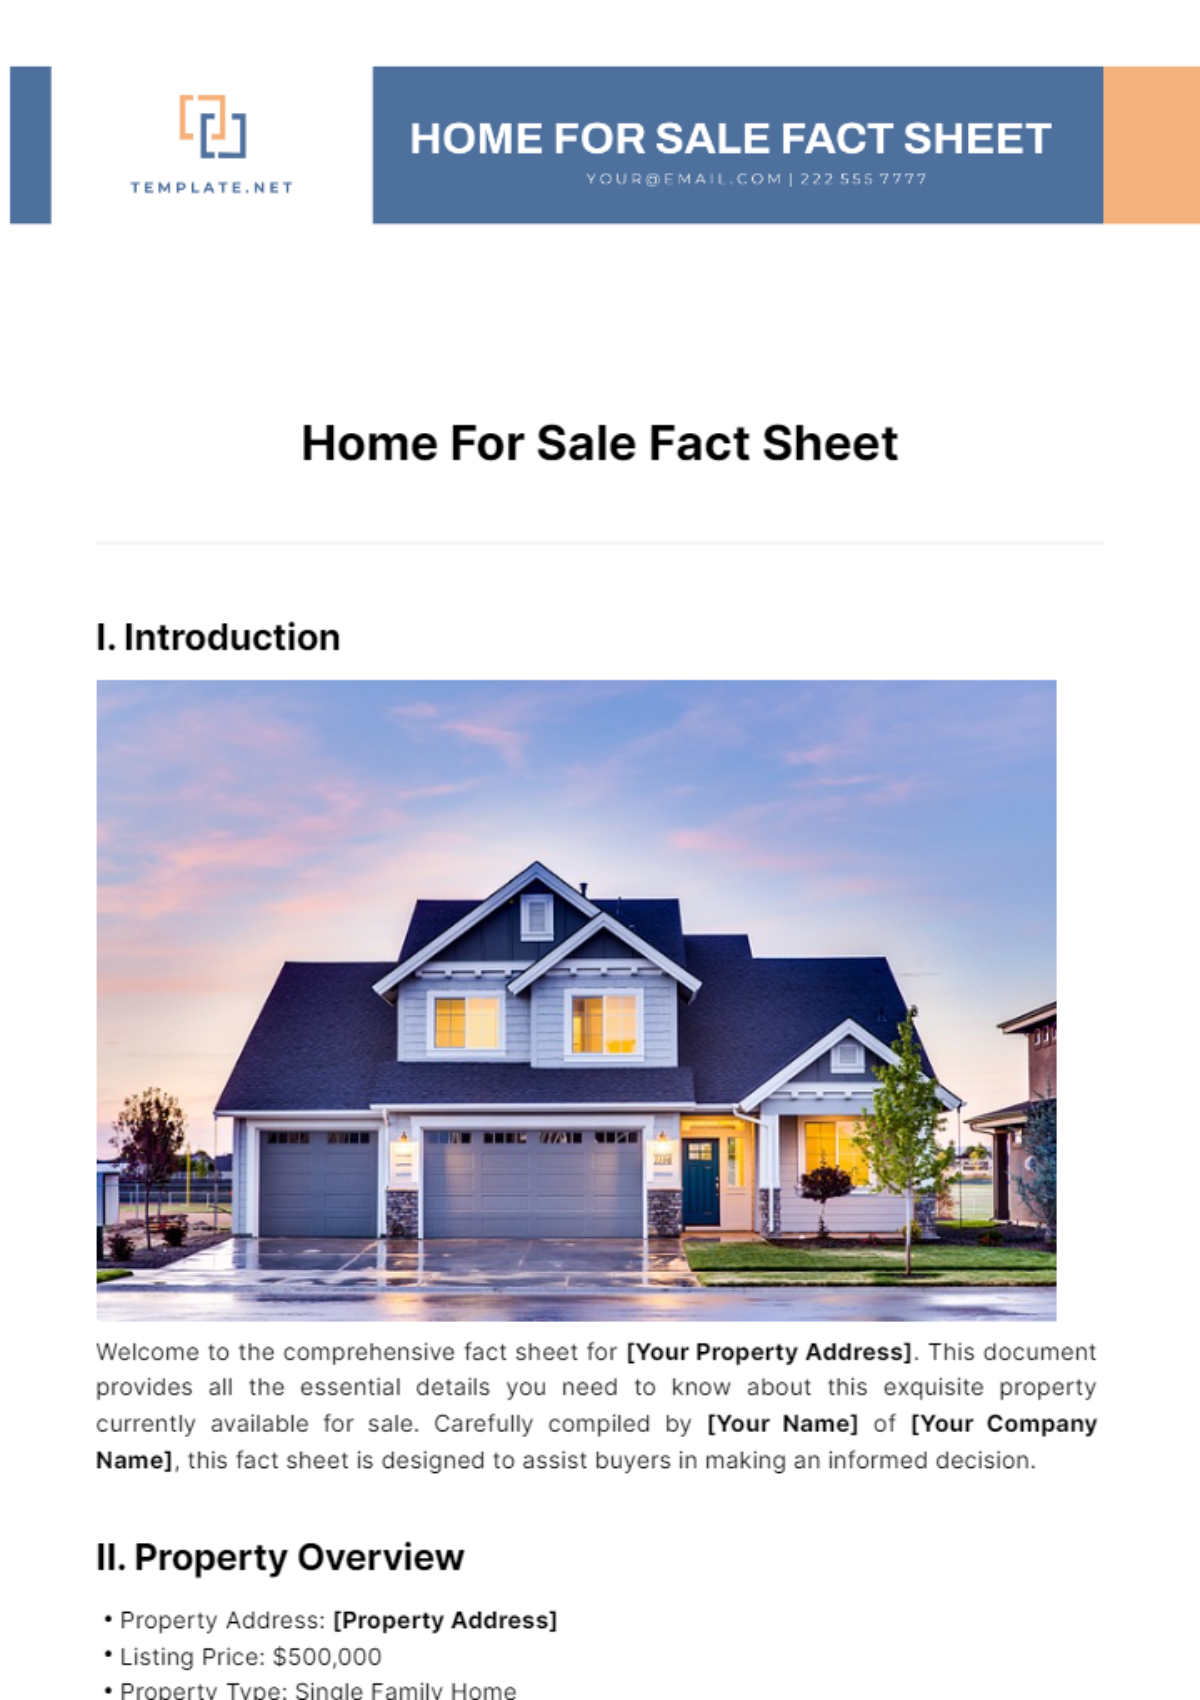 Home For Sale Fact Sheet Template